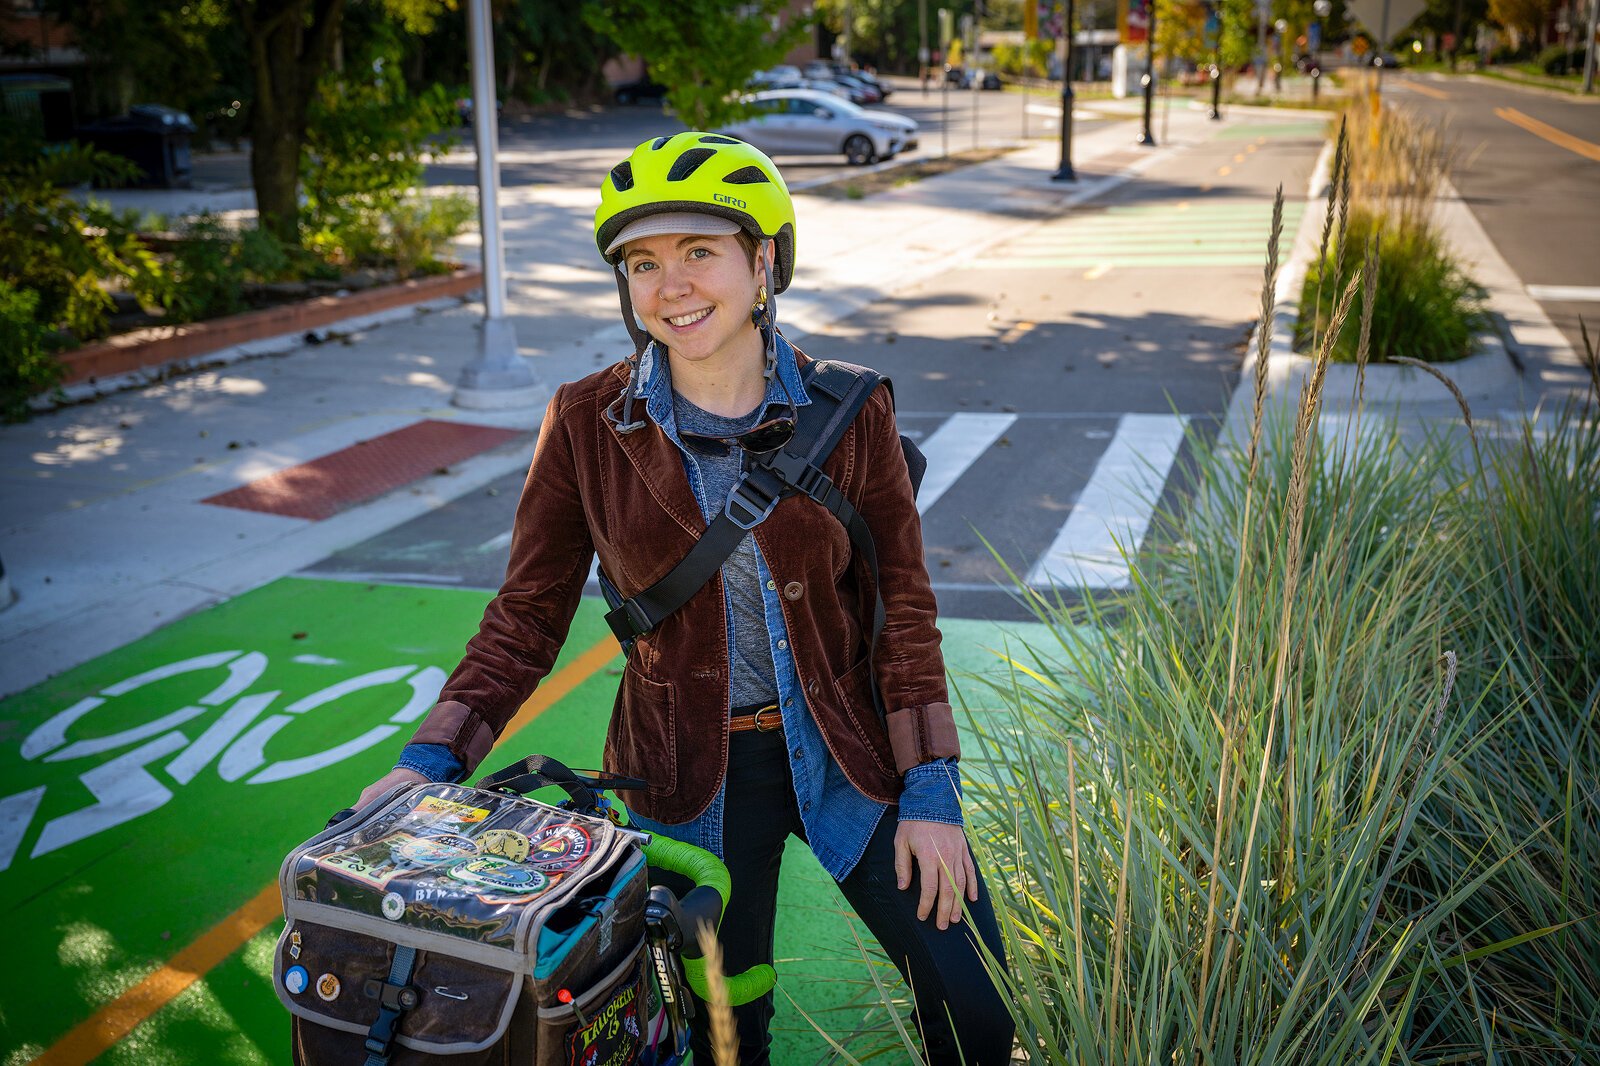 Jade Marks riding her bike on the South First Street bike lane in Ann Arbor.